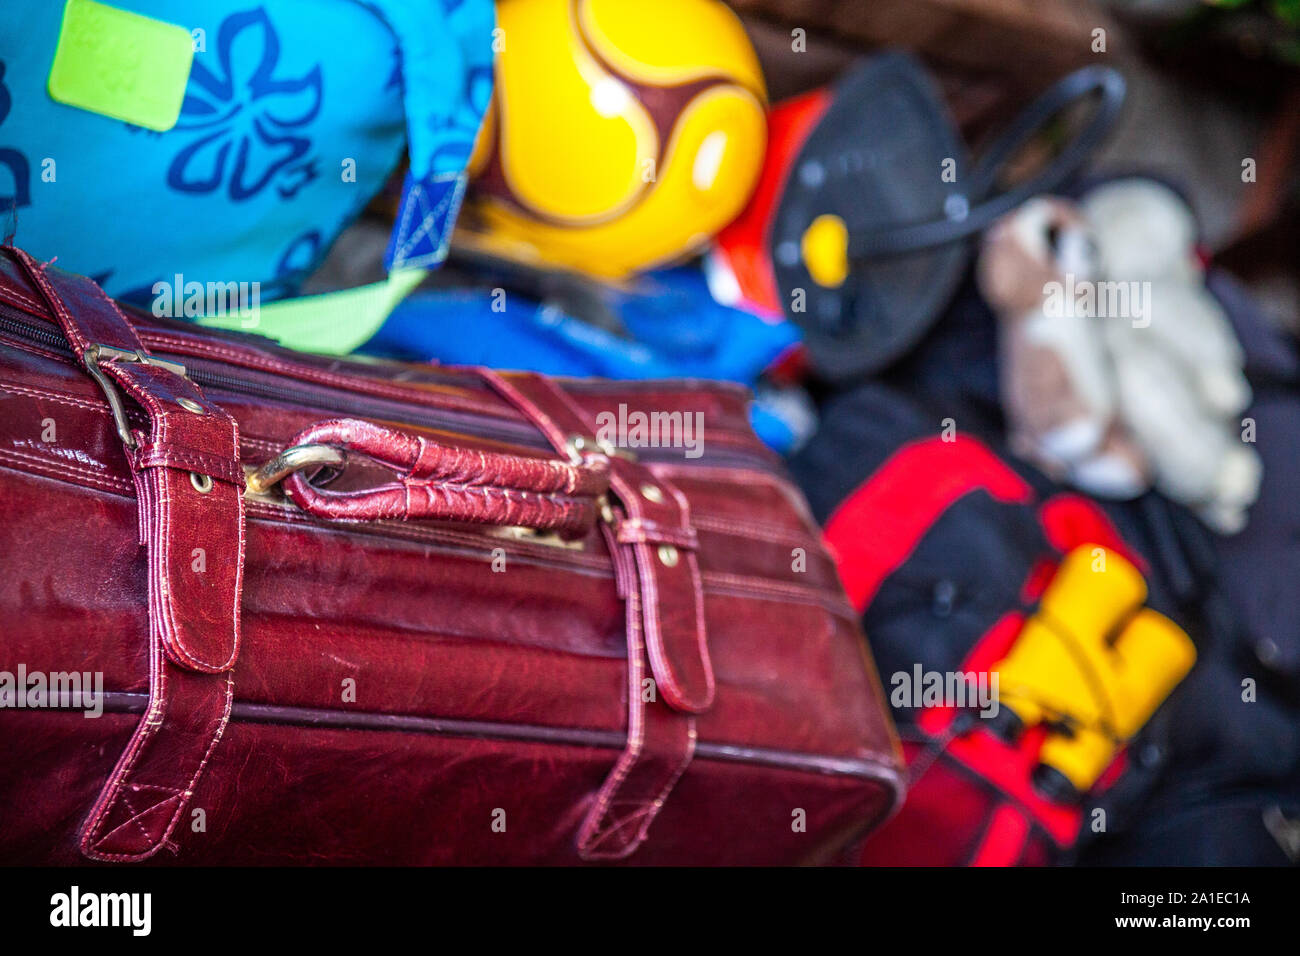 All My Bags Are Packed Im Ready to Go But How to Say Goodbye  by JoAnn  Ryan  Globetrotters  Medium